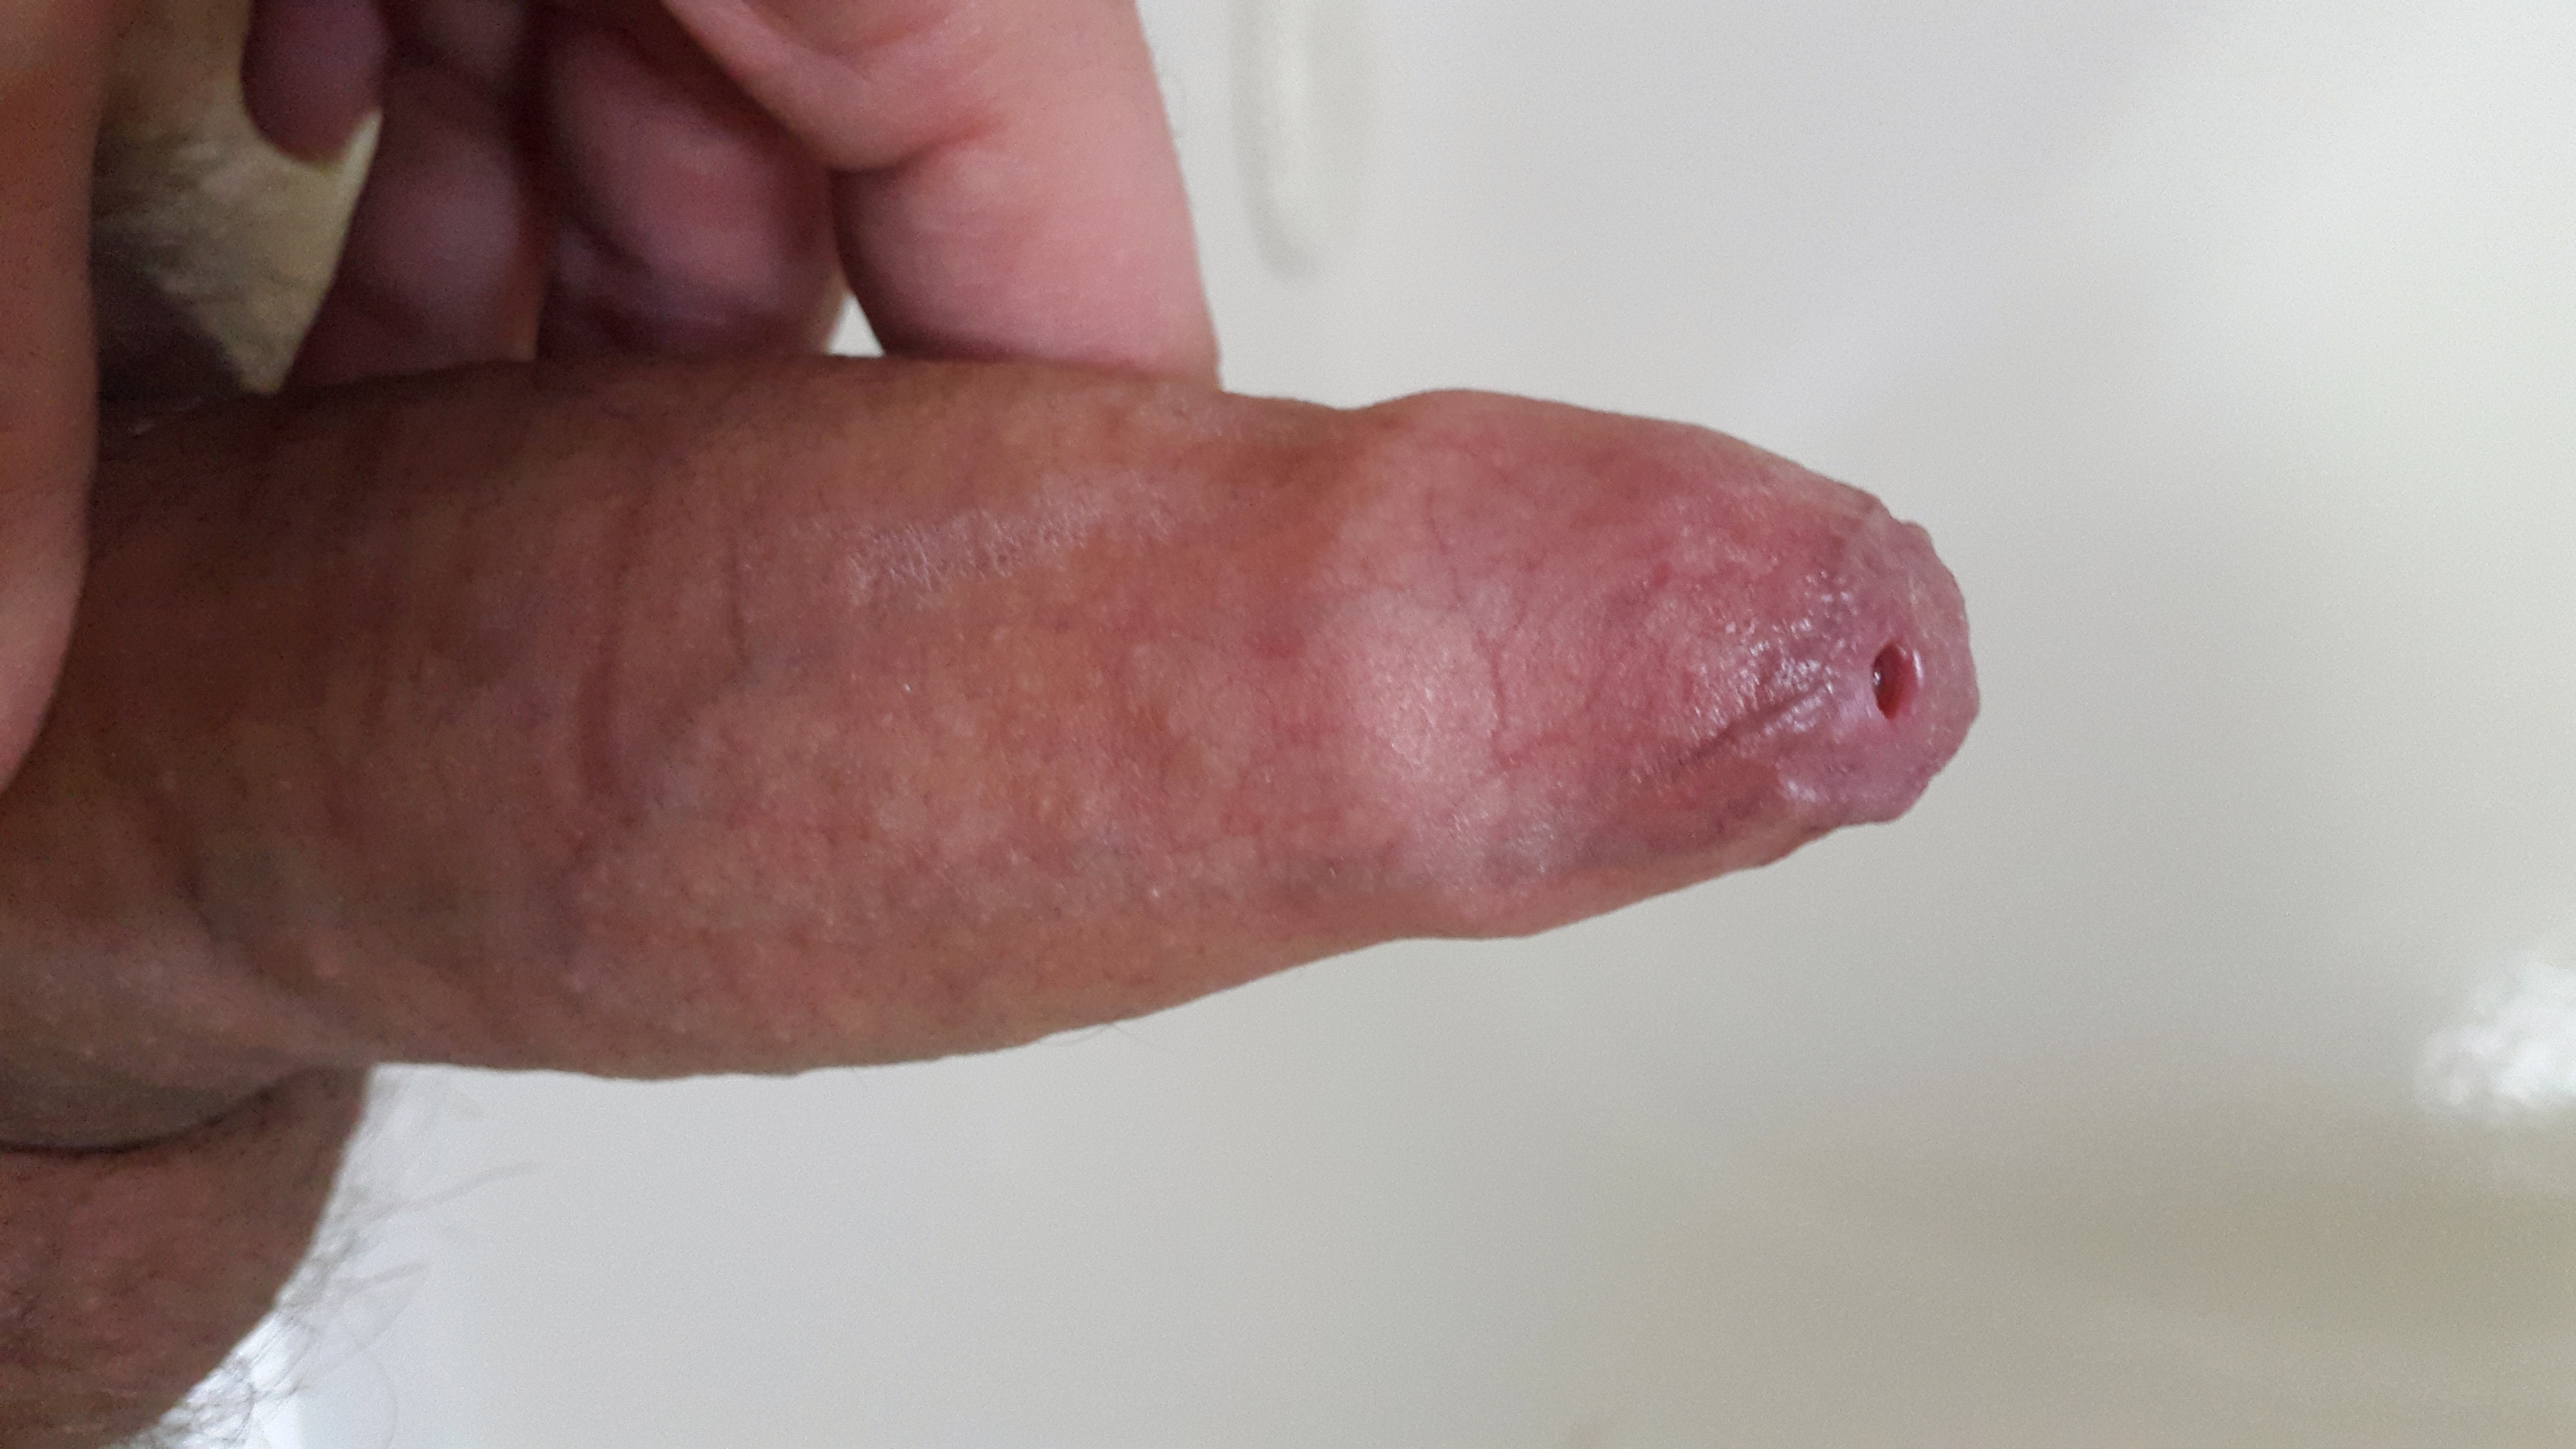 Penis with phimosis after stretching